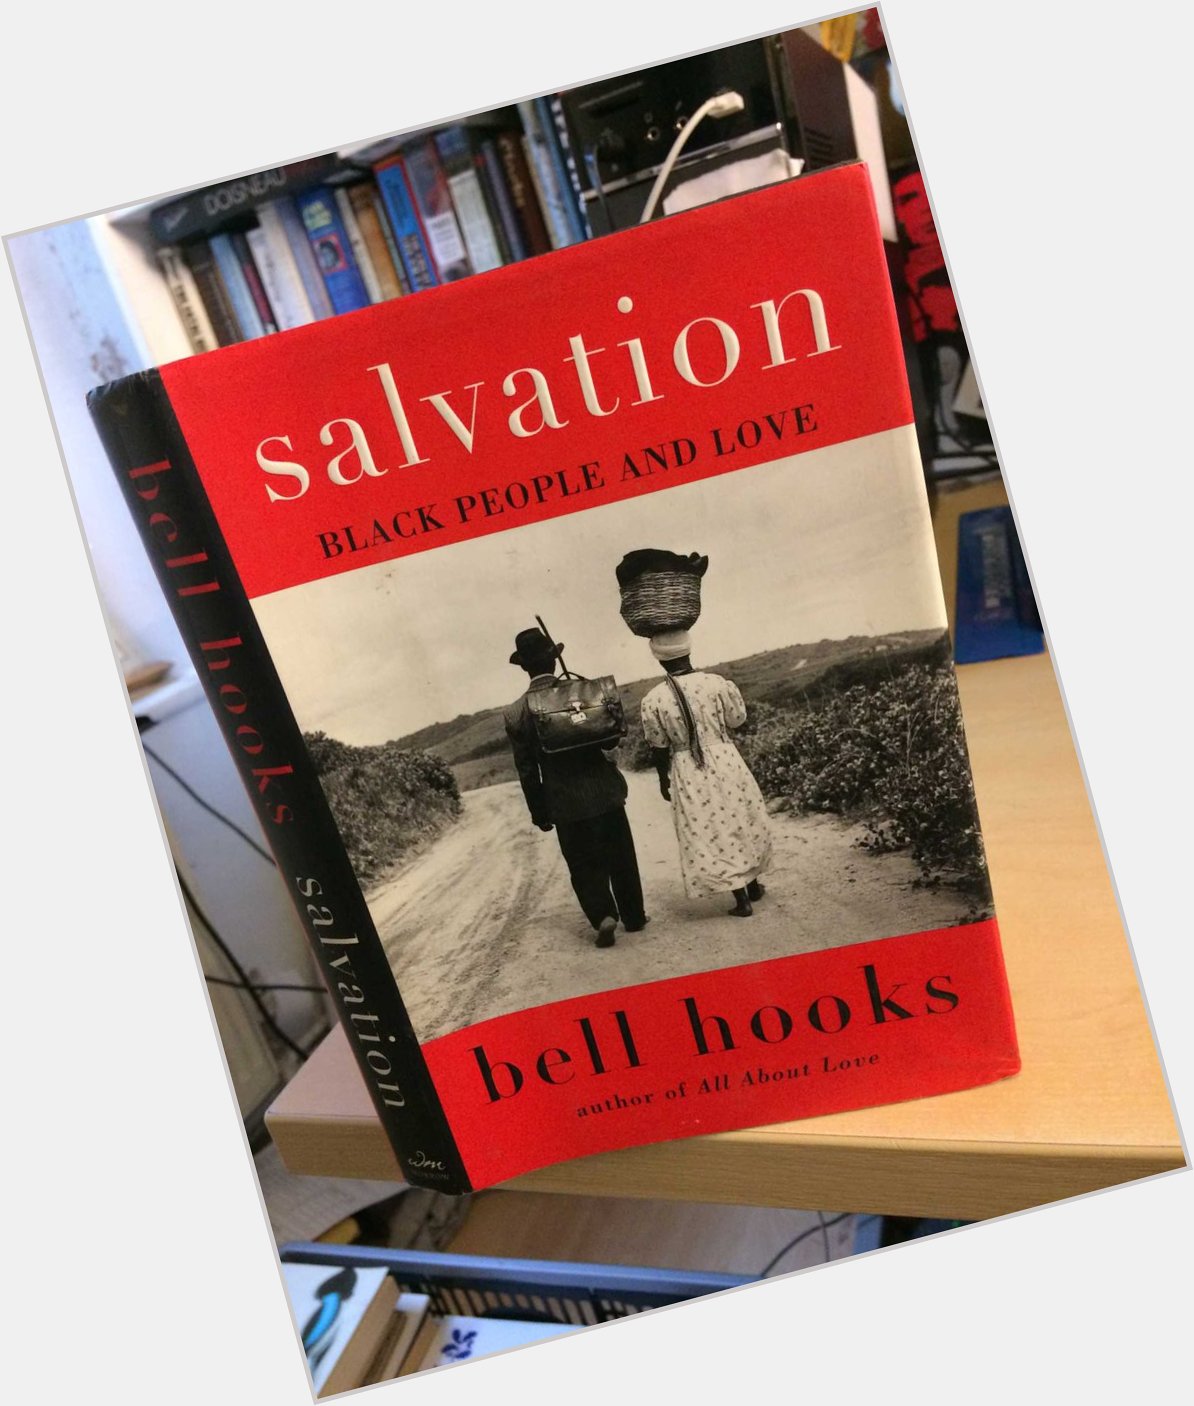 The best book in the trilogy, in my opinion. 

Happy Birthday to the late bell hooks. 